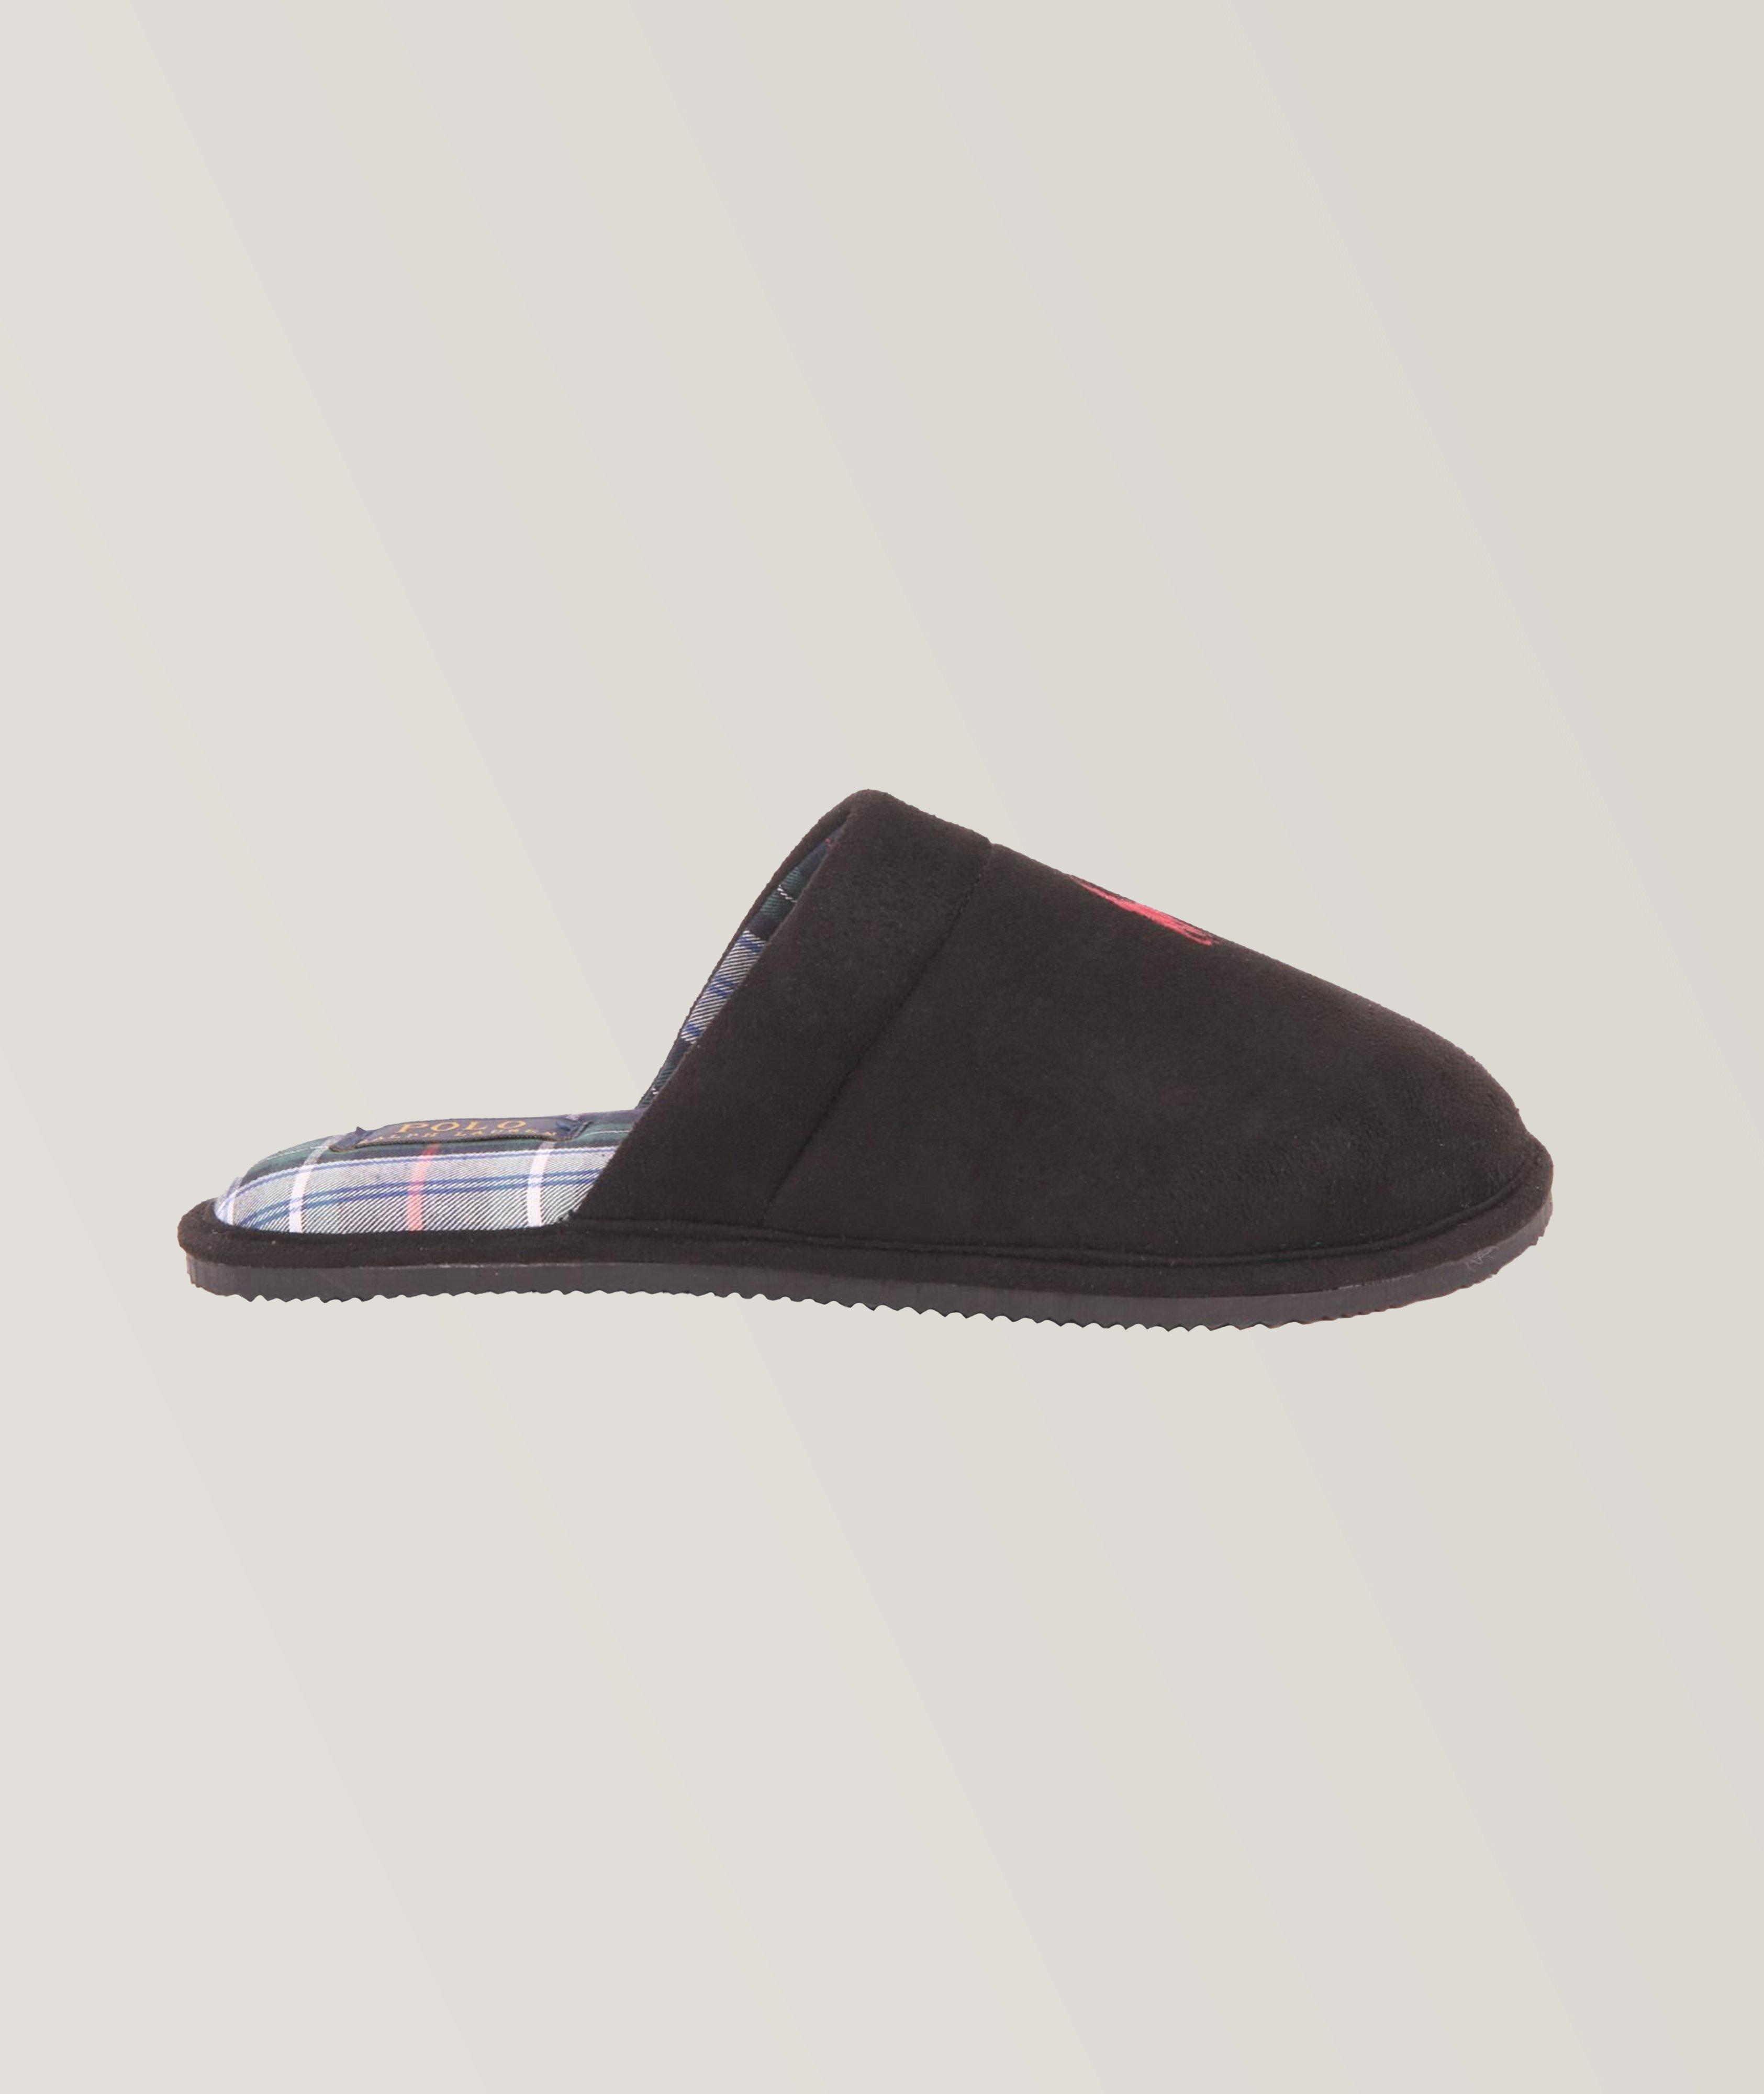 Kalrence Suede Slippers image 0